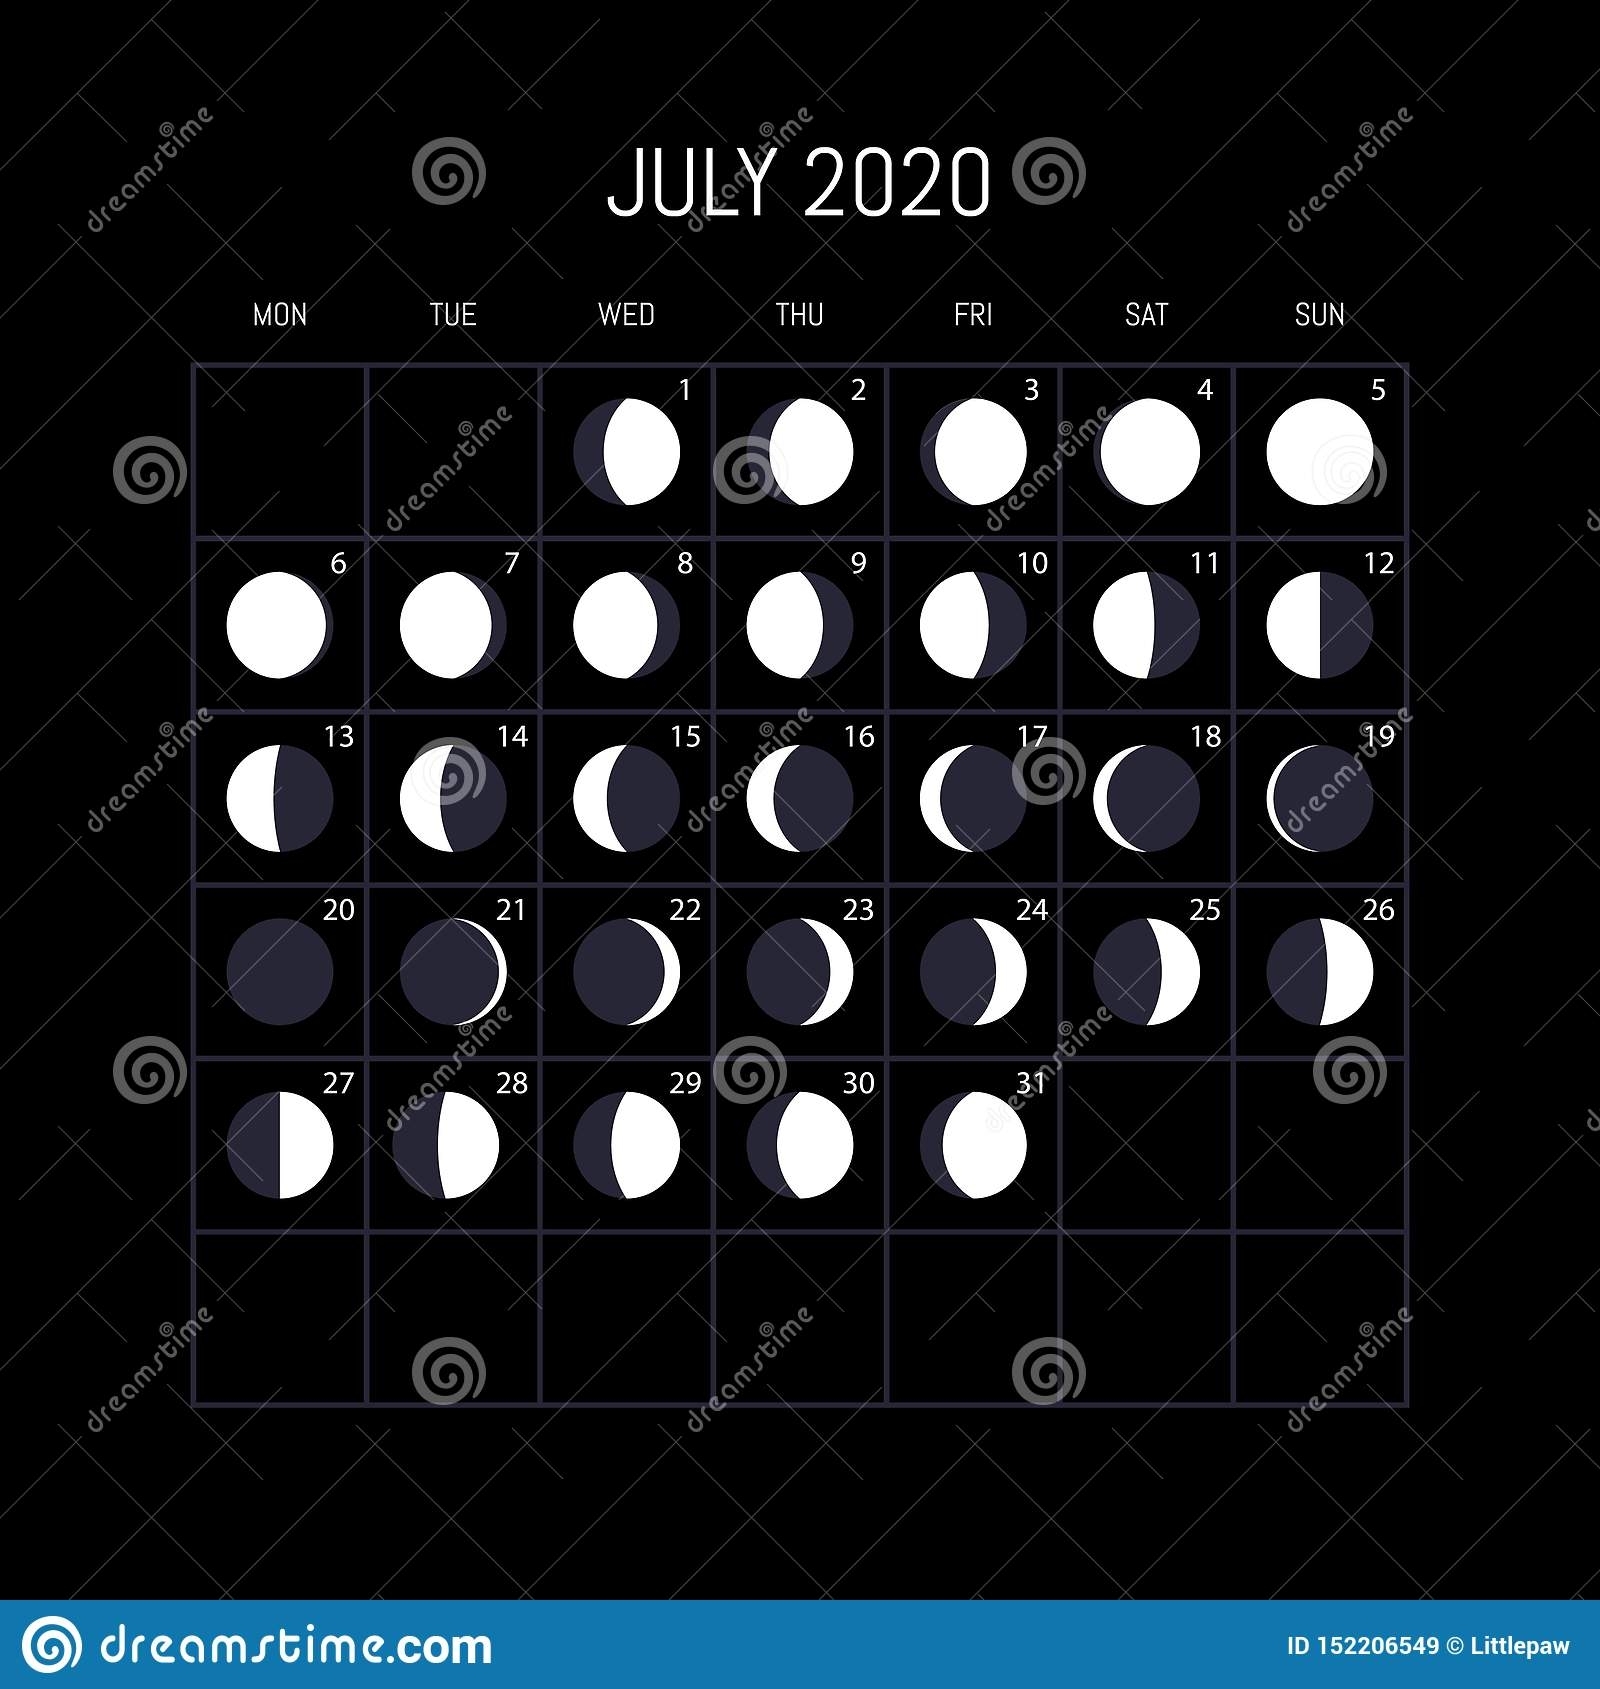 Catch August Calendar 2021 With Moon Cycle